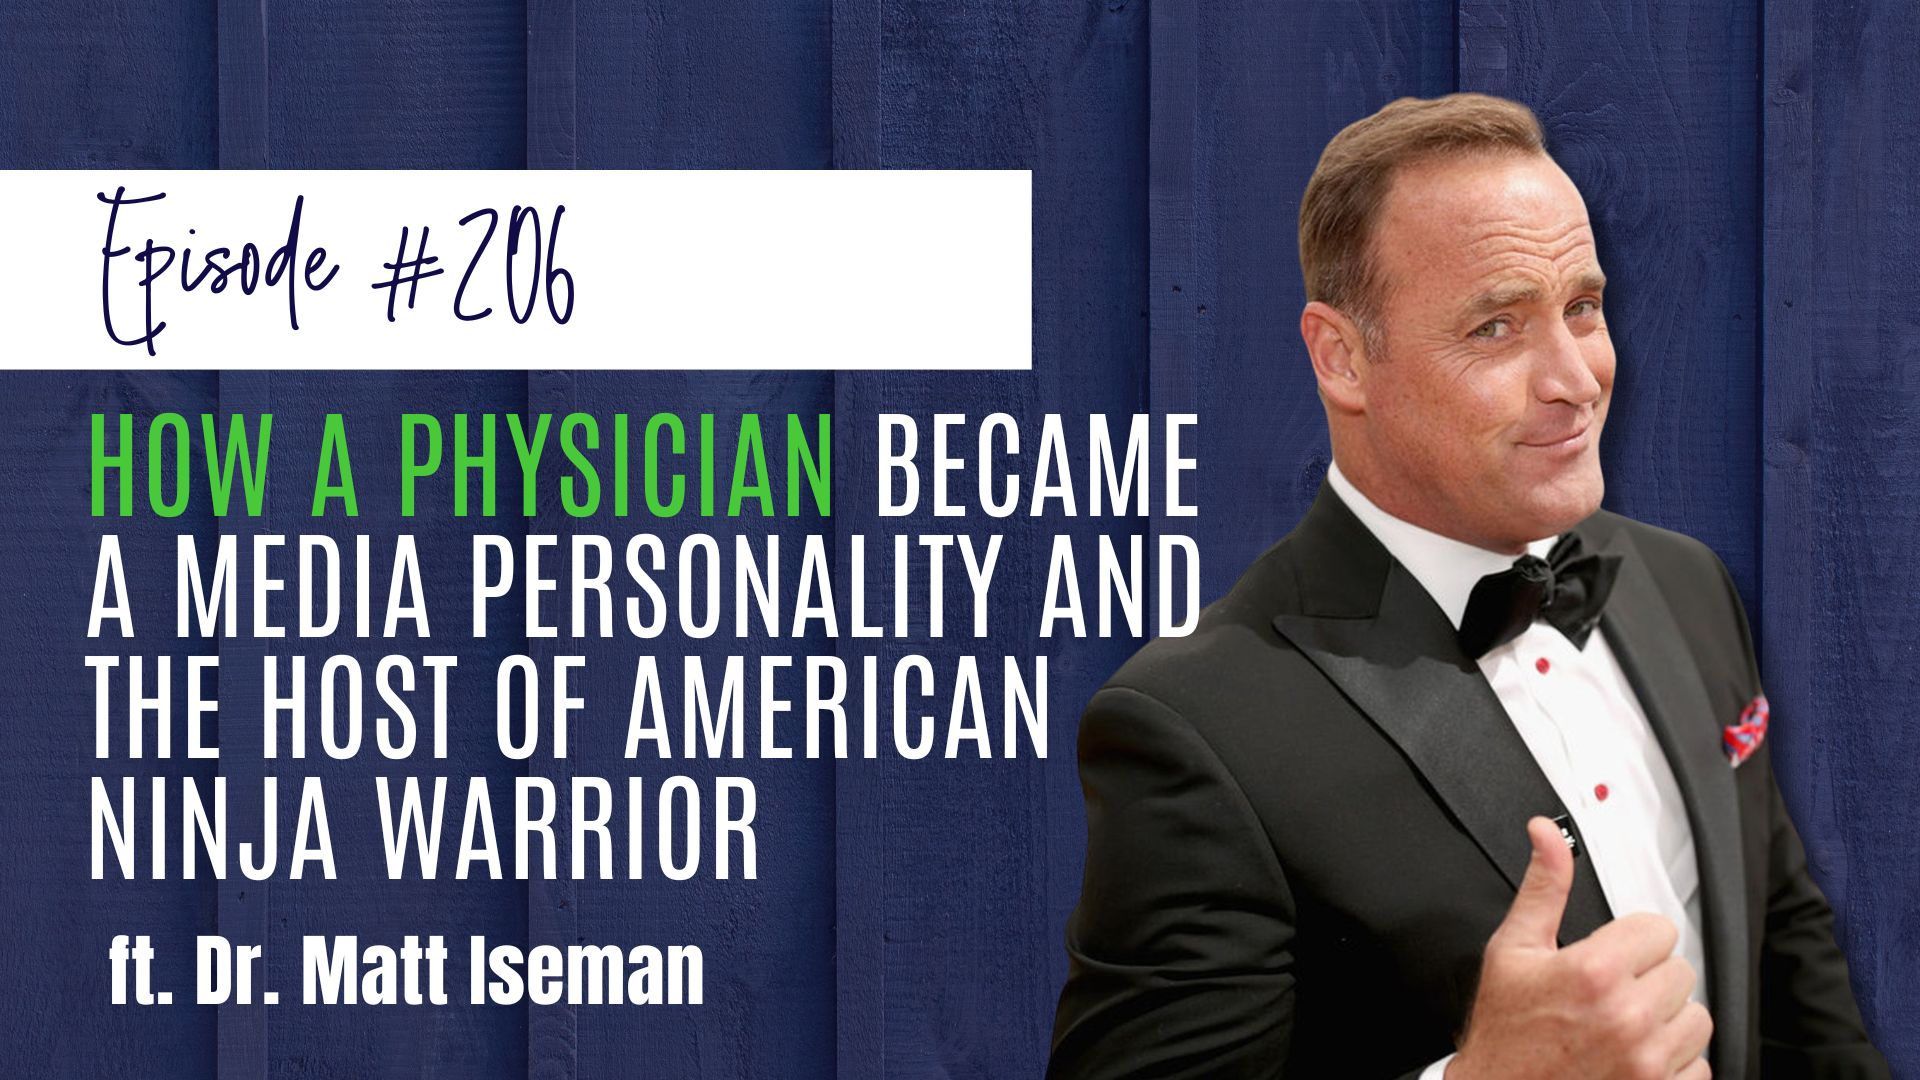 #206 How a Physician Became a Media Personality and the Host of American Ninja Warrior ft. Dr. Matt Iseman